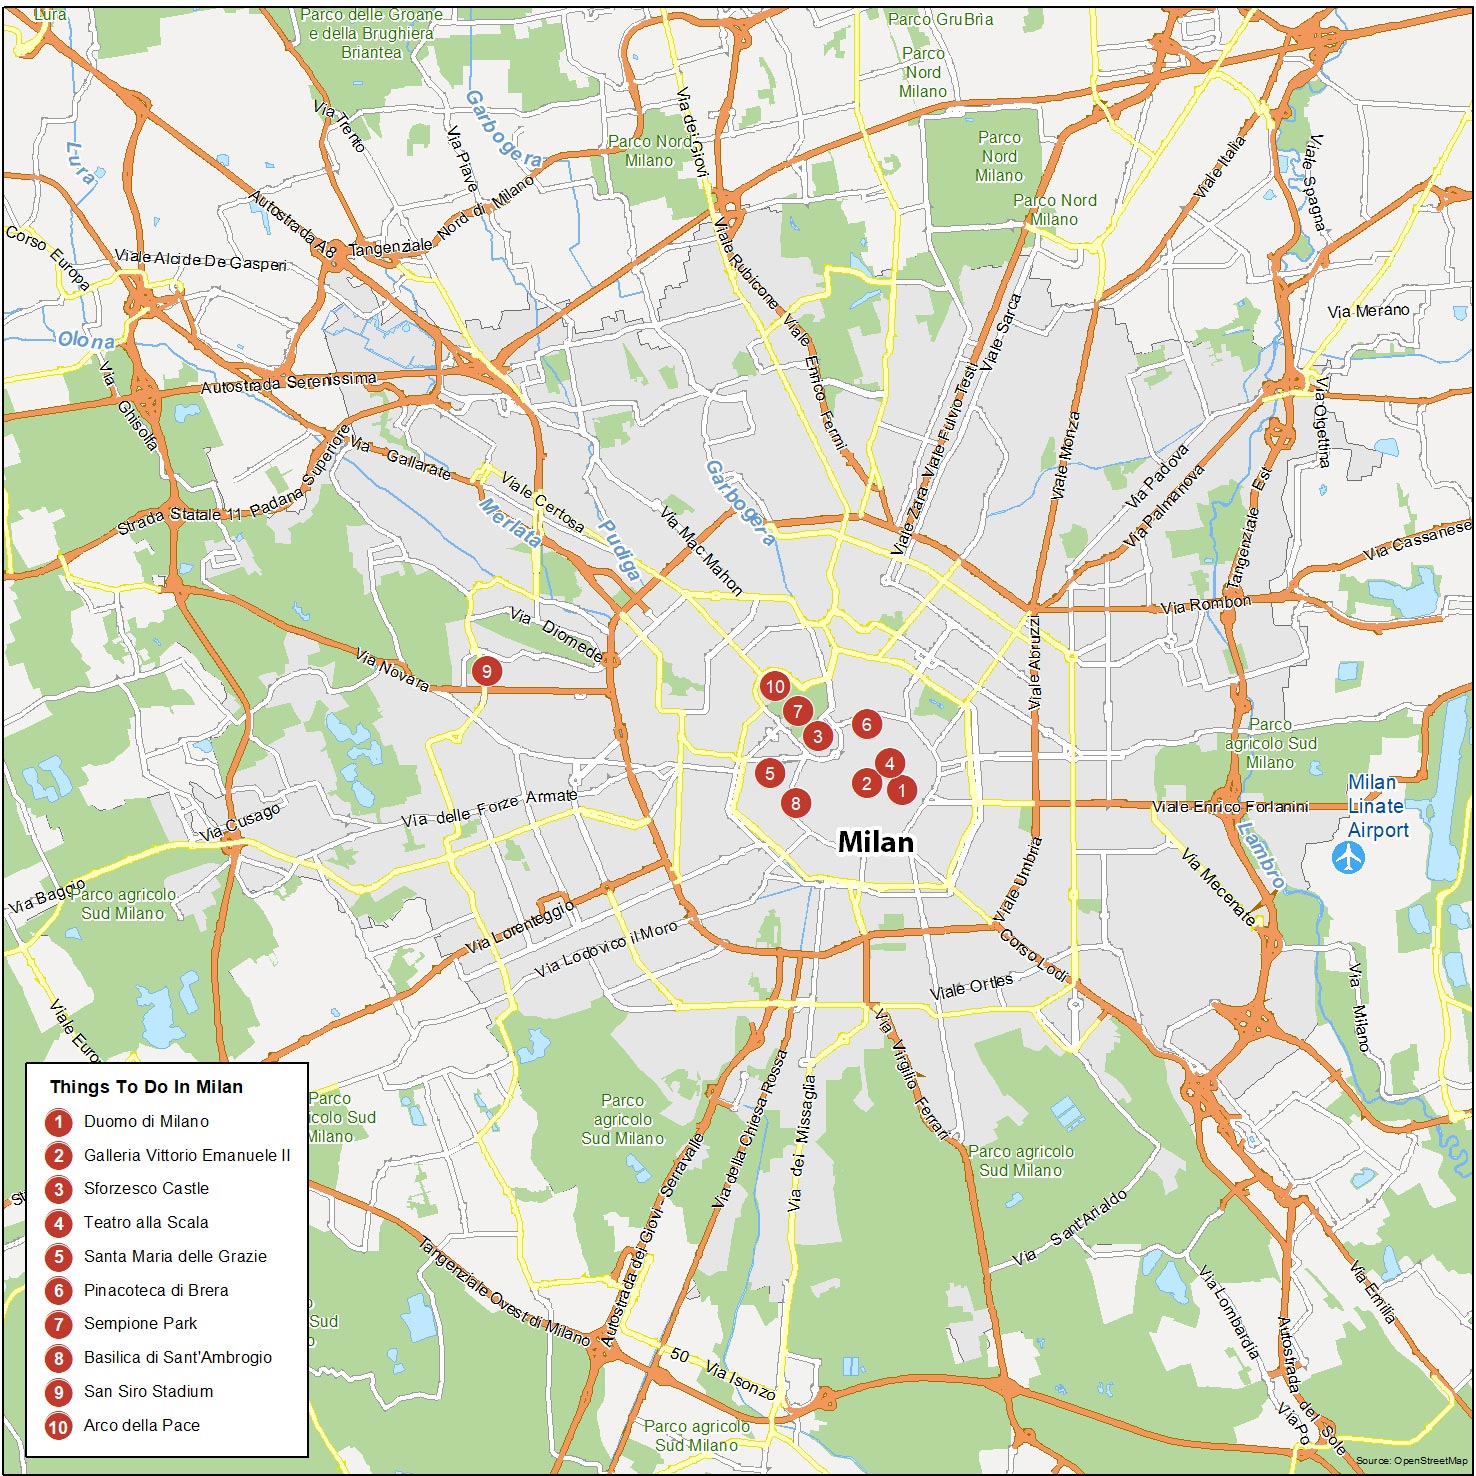 An Interactive Map of the Galleria